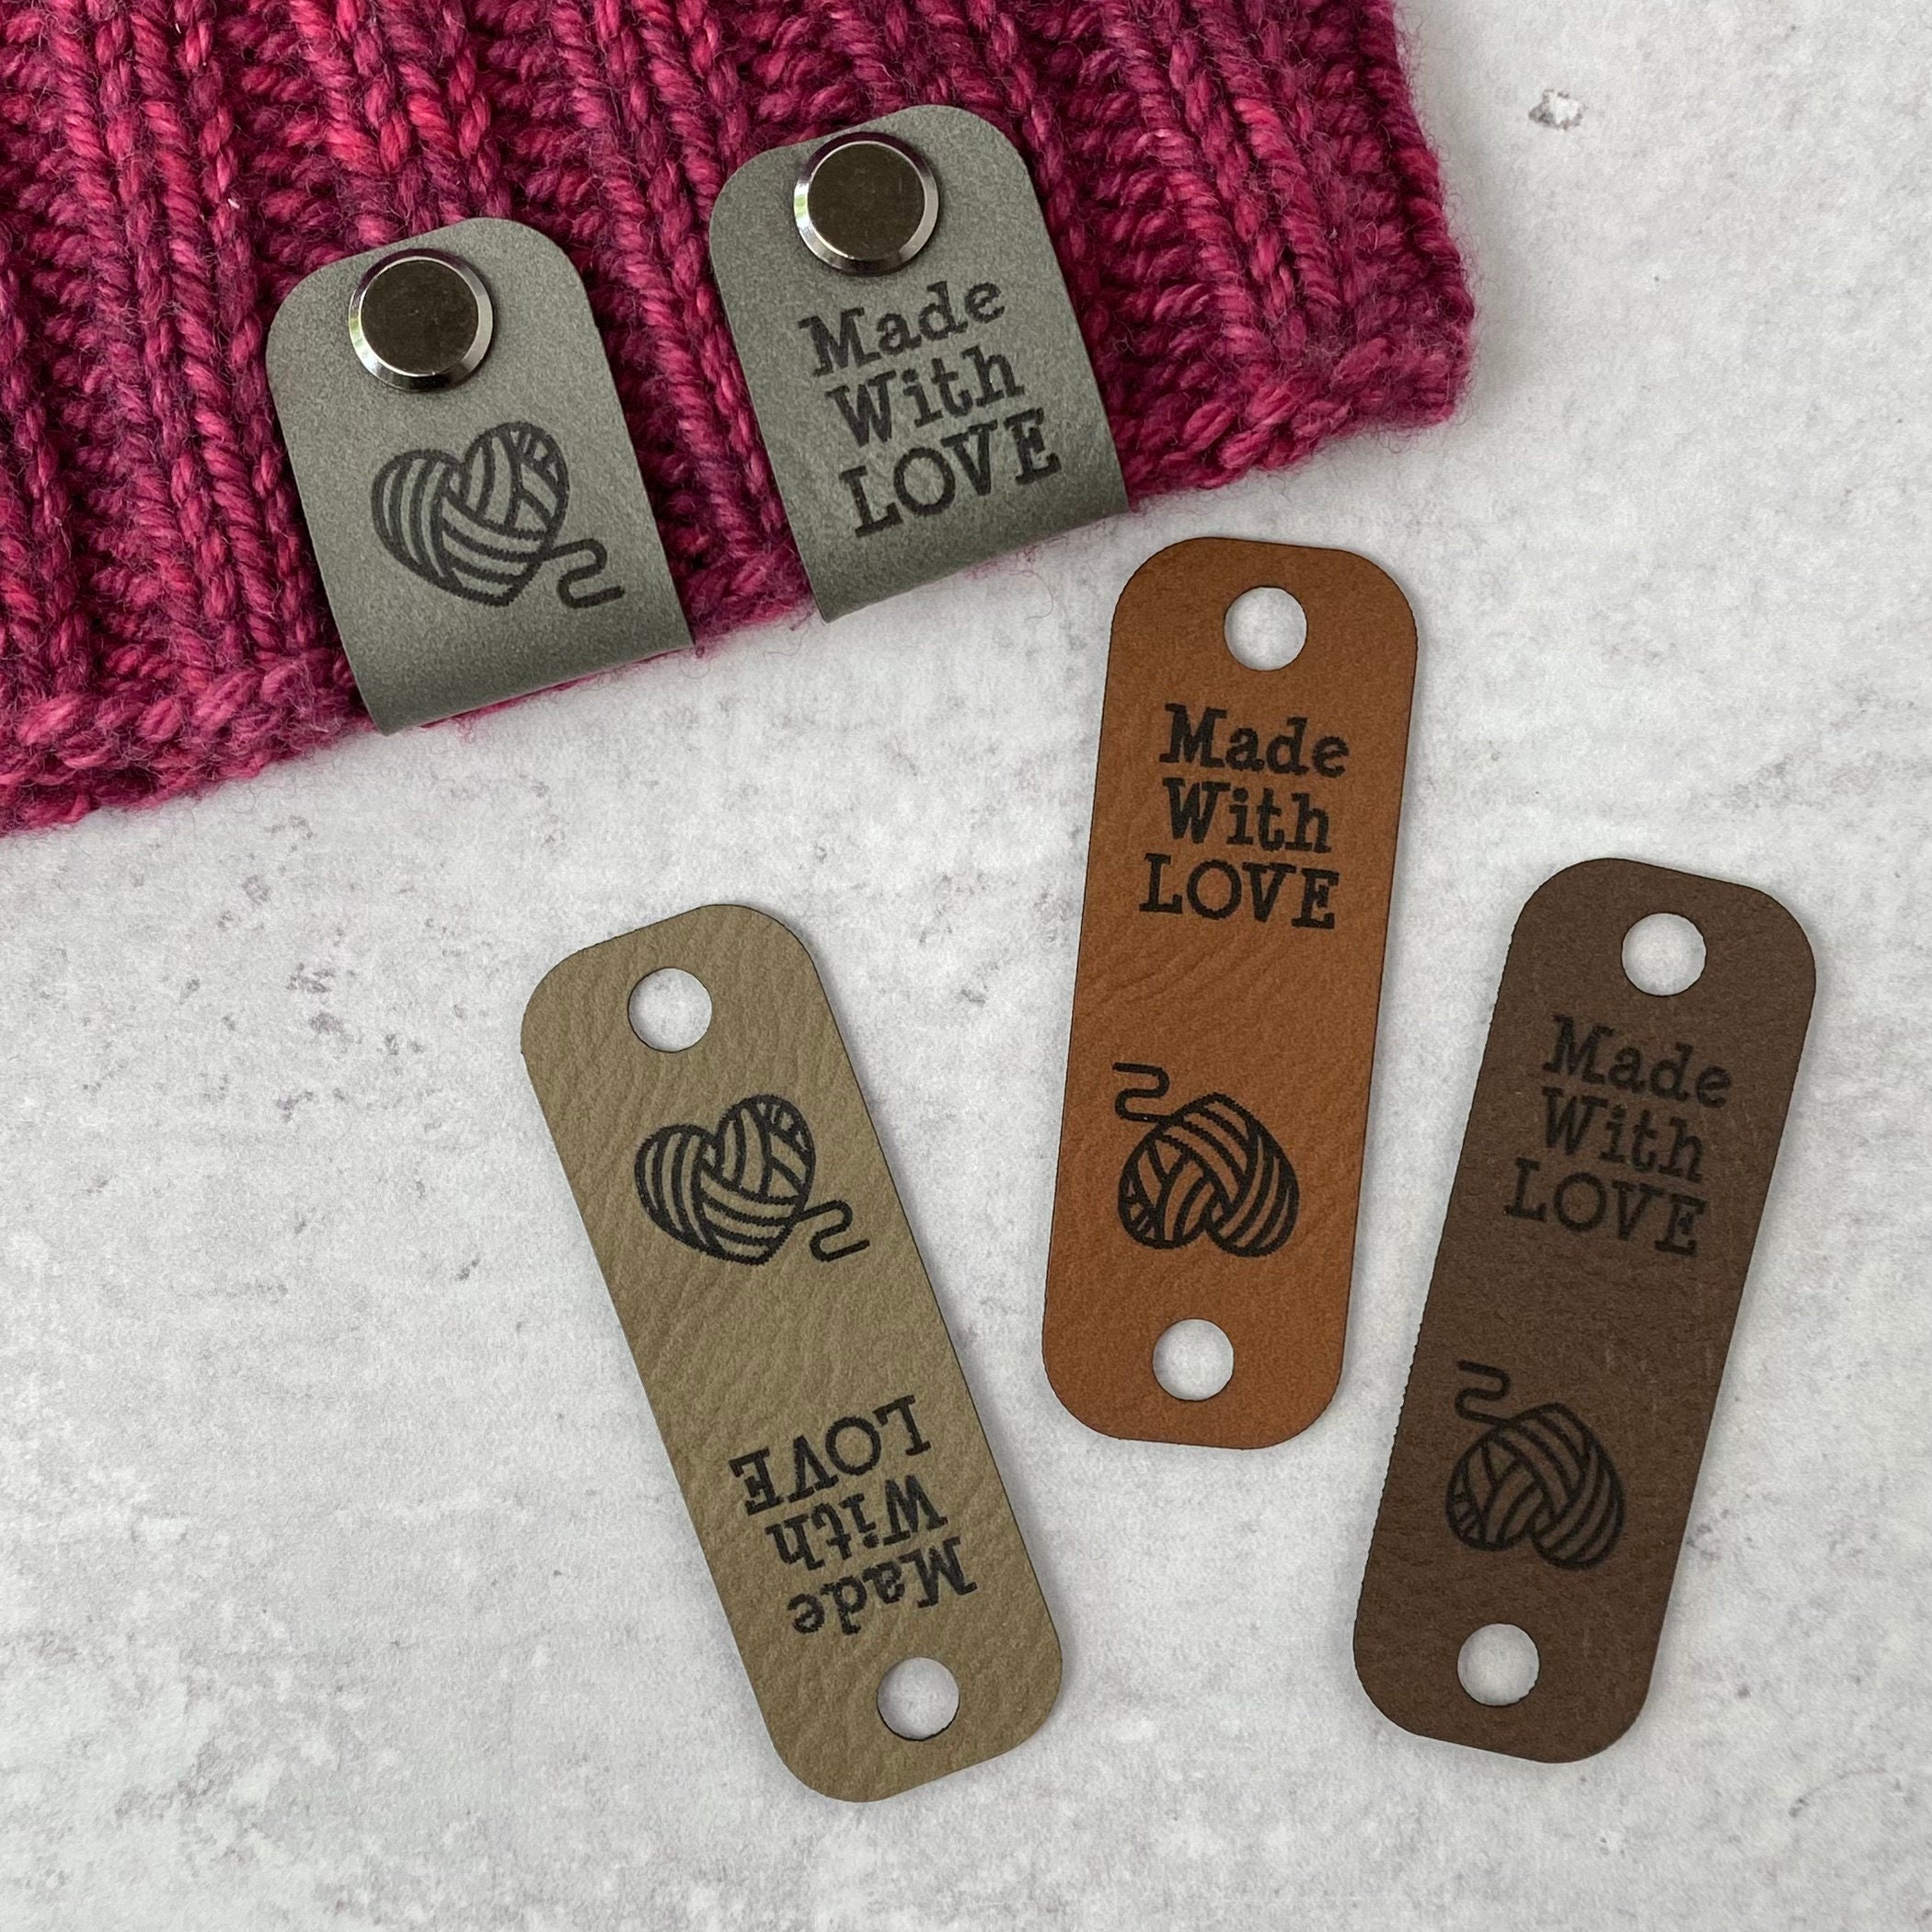 Made With Love Faux Leather Screw in Tags for Knitting/crochet Set of 3  Screws Included Various Color Options 